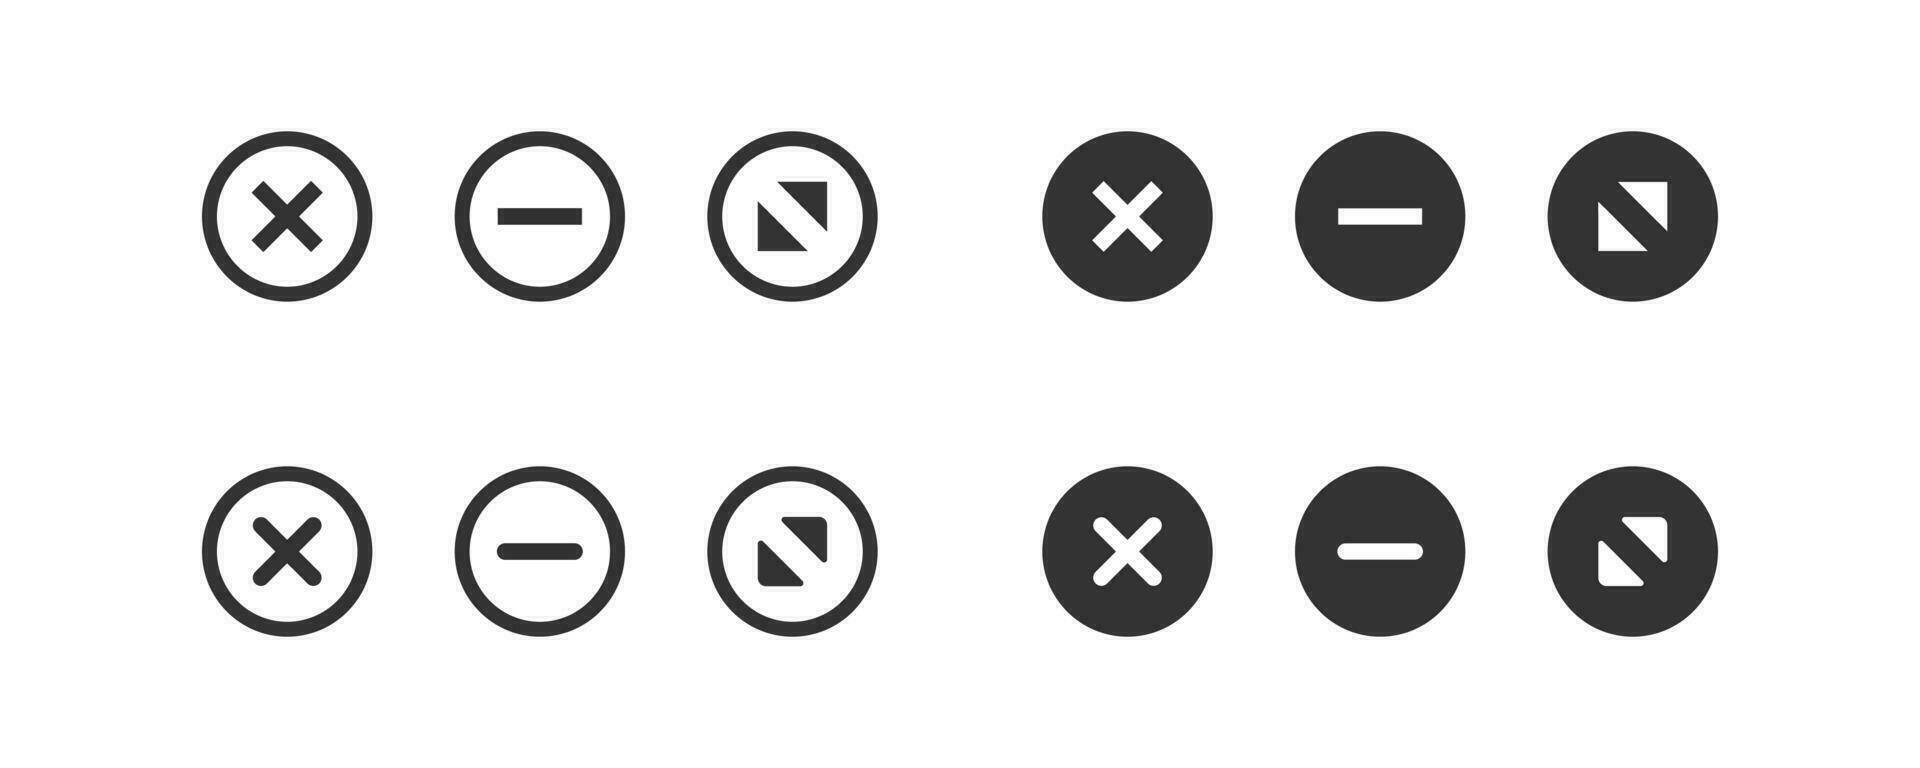 Maximize and minimize round buttons icon set. Window browser button illustration symbol. Sign web page button vector